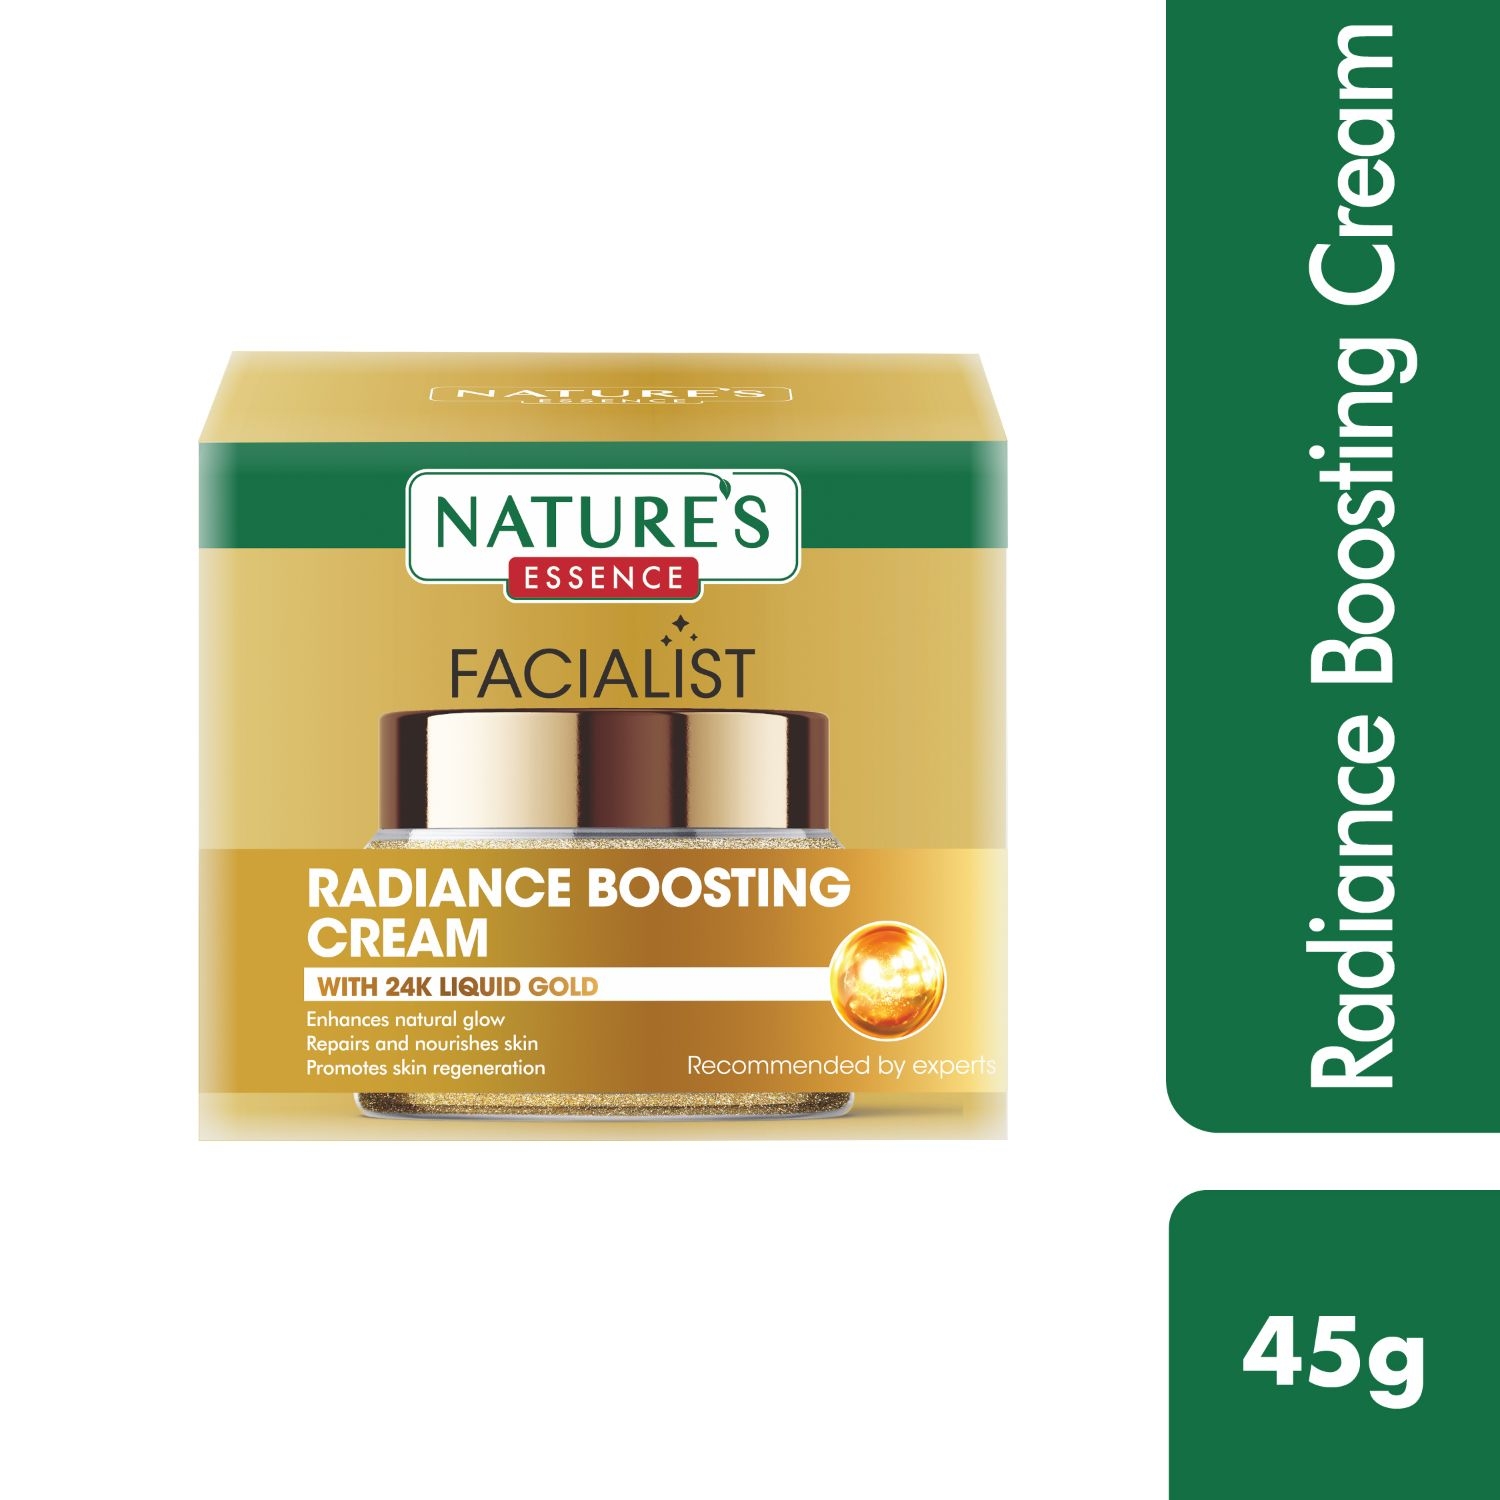 Nature's Essence | Nature's Essence Facialist Radiance Boosting Cream with 24K Liquid Gold (45g)